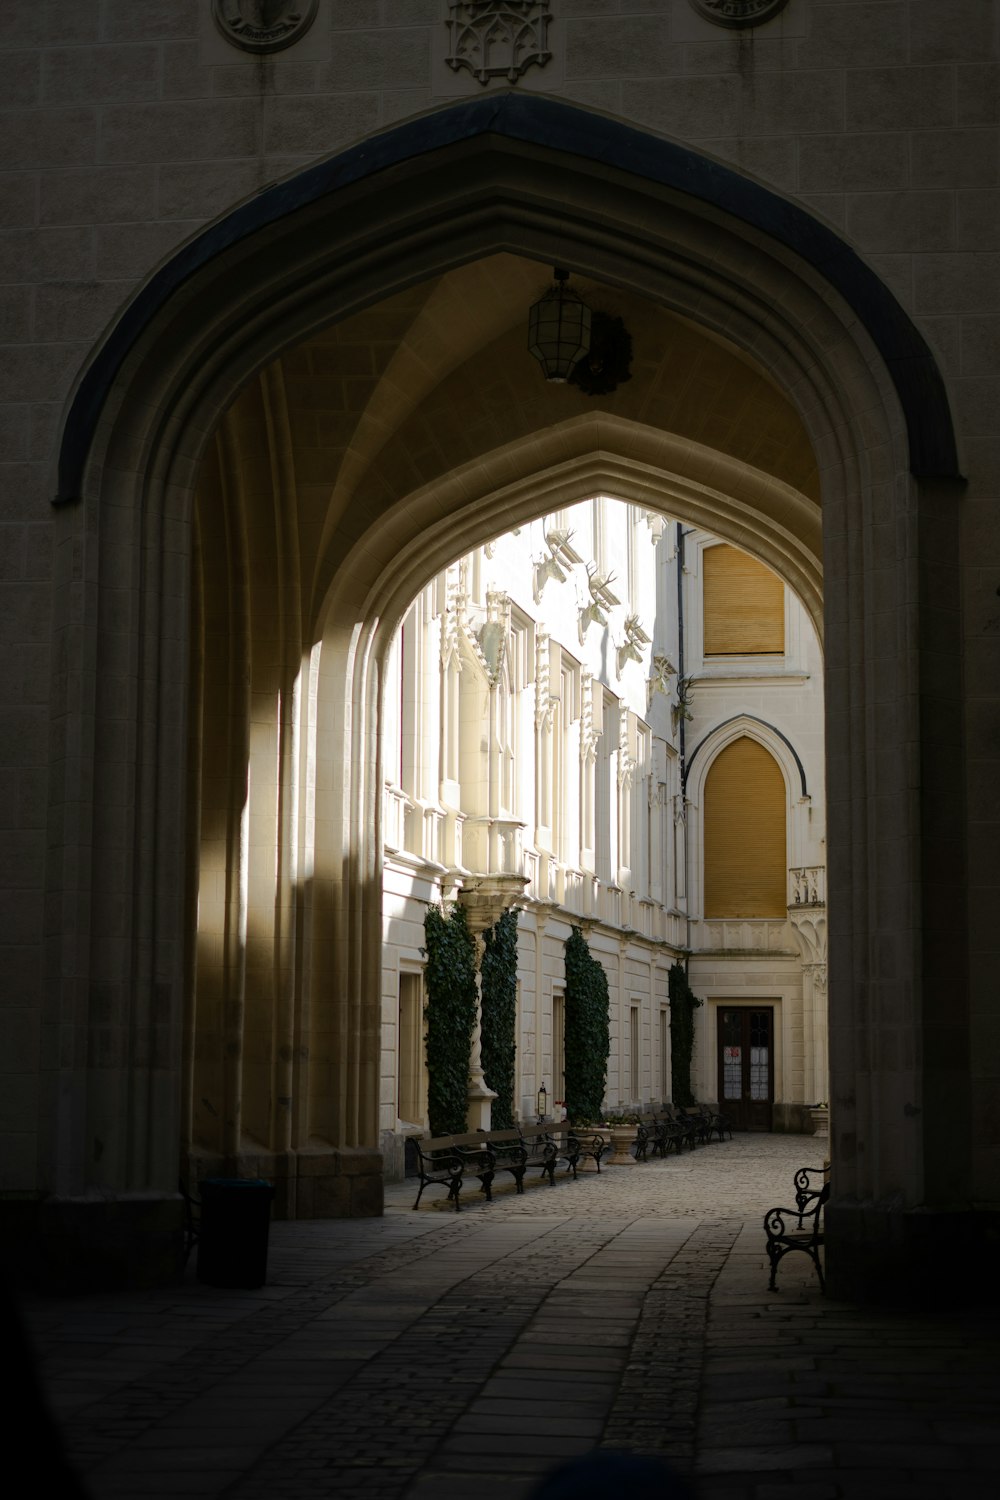 an archway leading into a building with benches